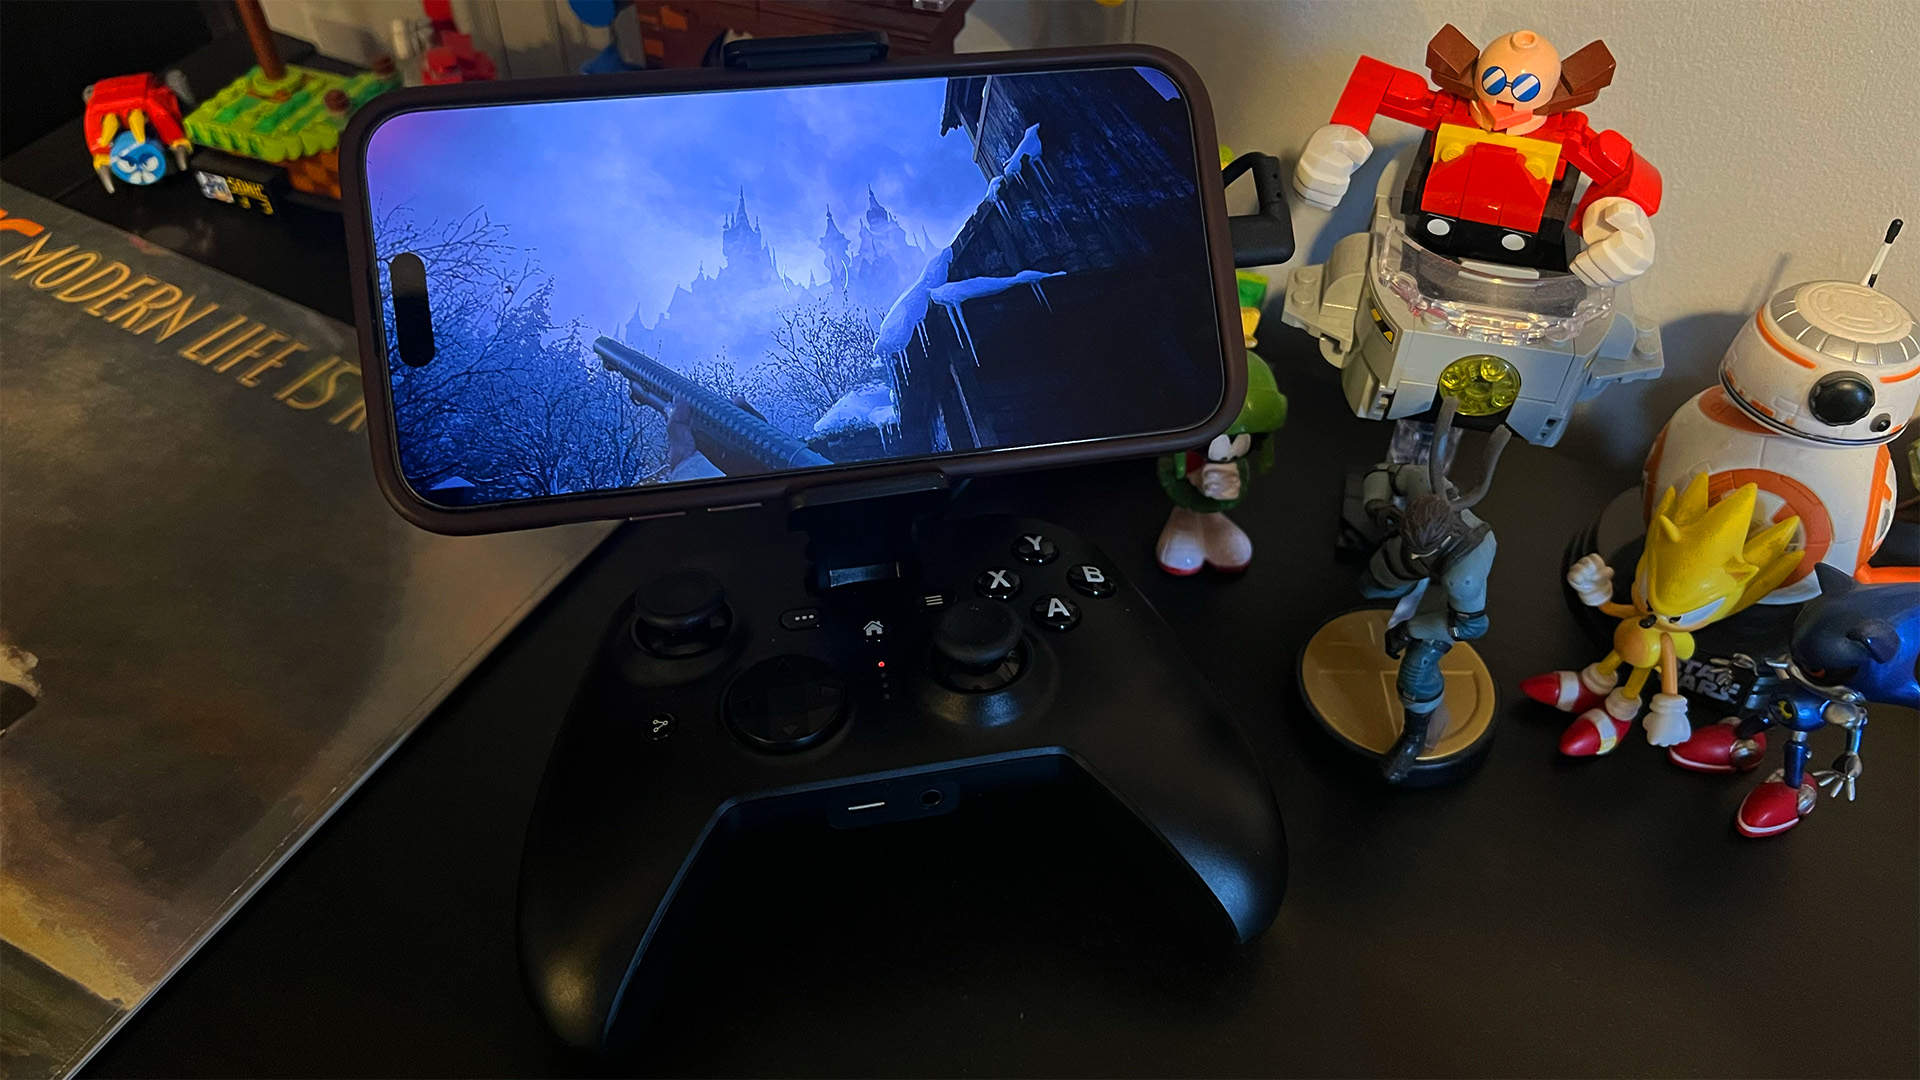 Resident Evil Village on 15 Pro Max with RIOT Controller on desk